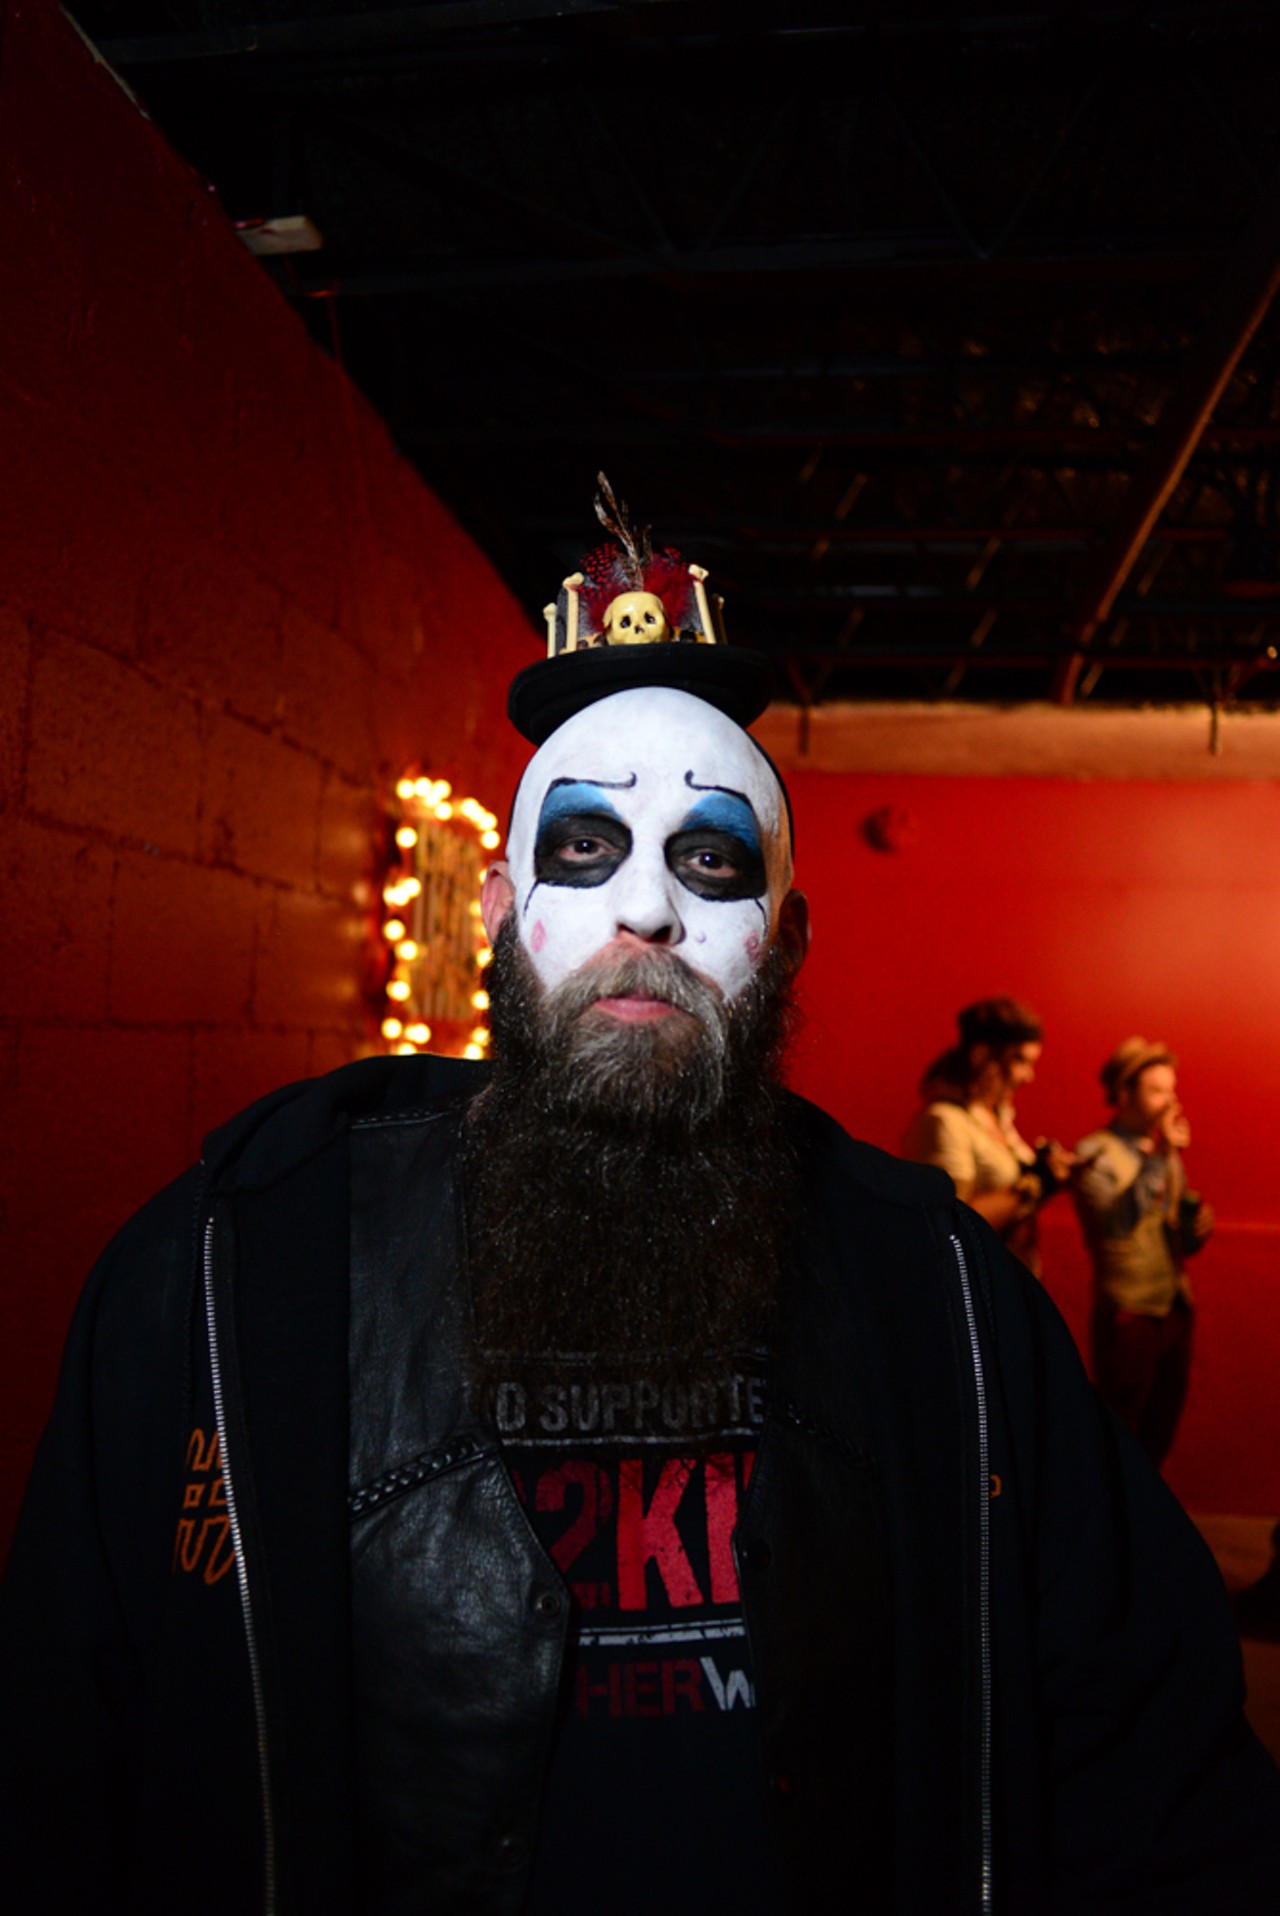 48 photos of the beards, babes, and fire breathers we saw at the Circus of Whiskers